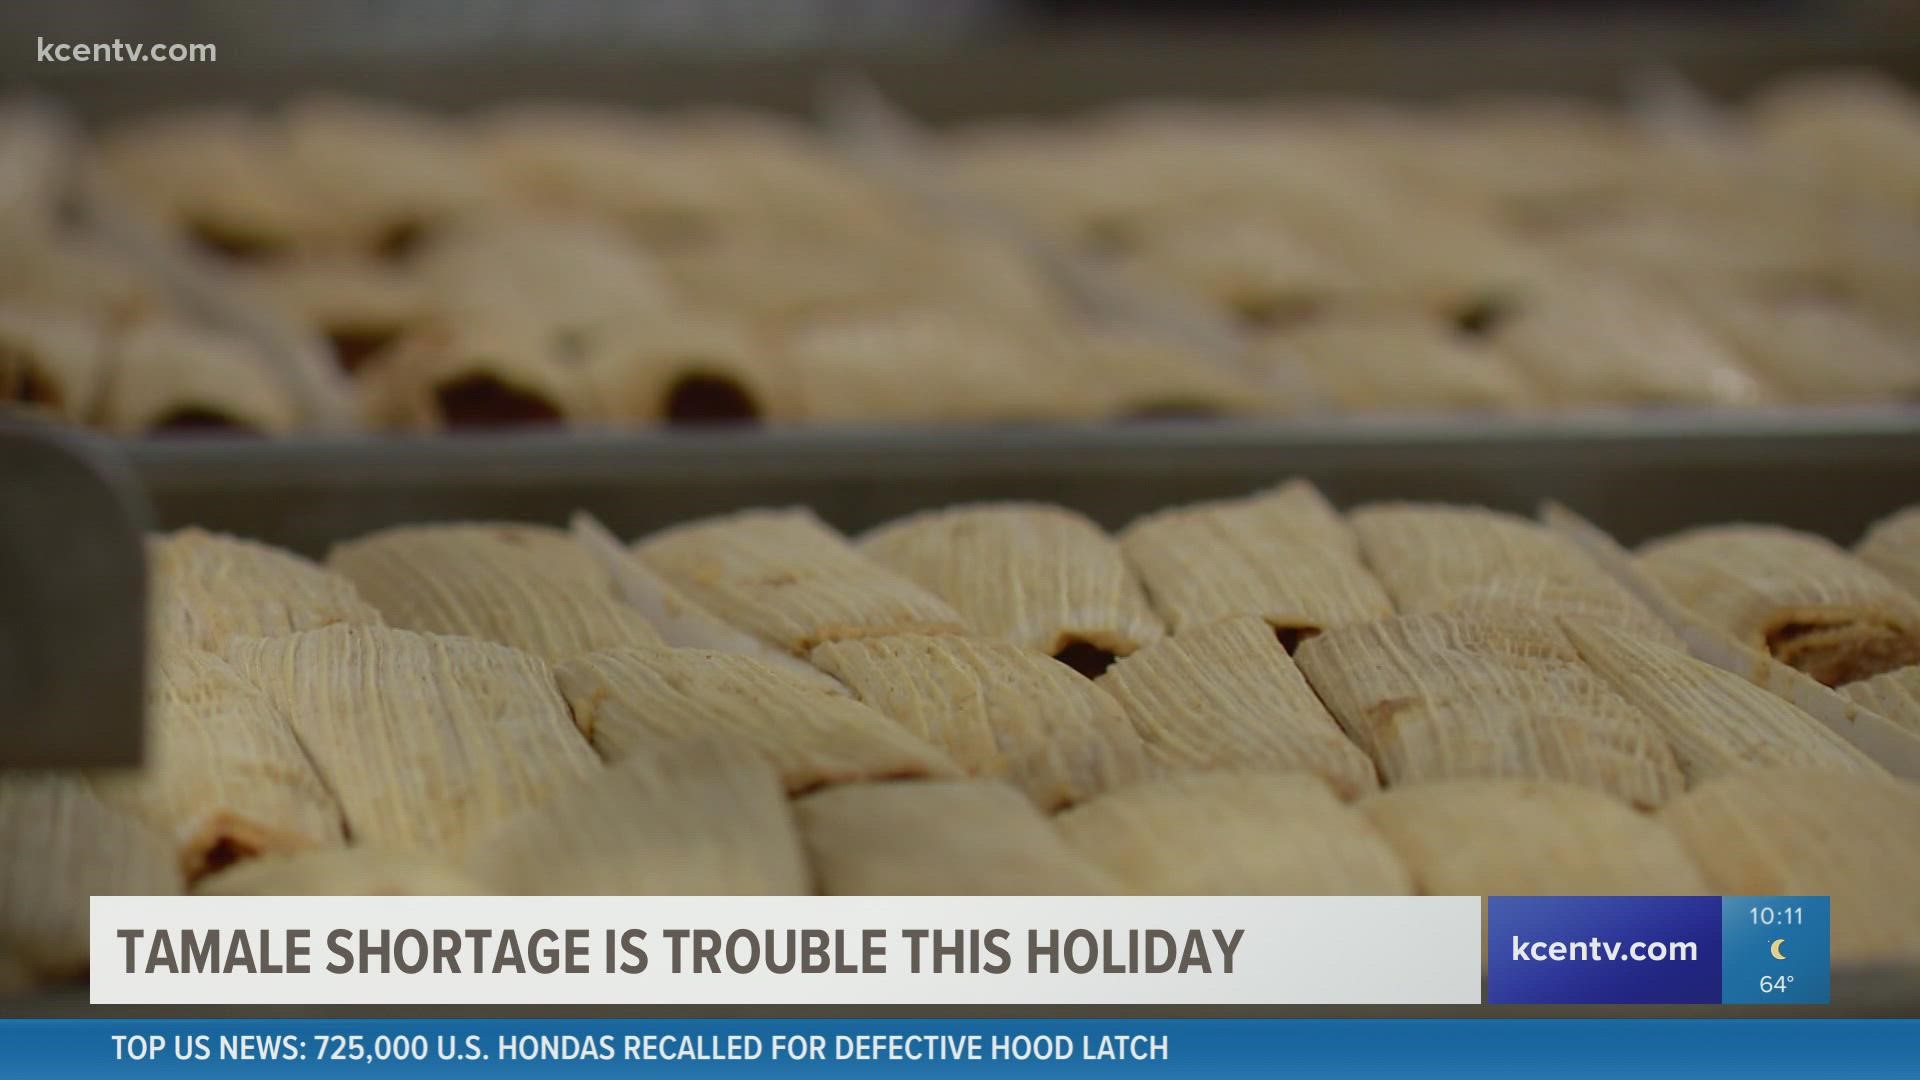 A shortage on tamales means higher prices for them this holiday season.